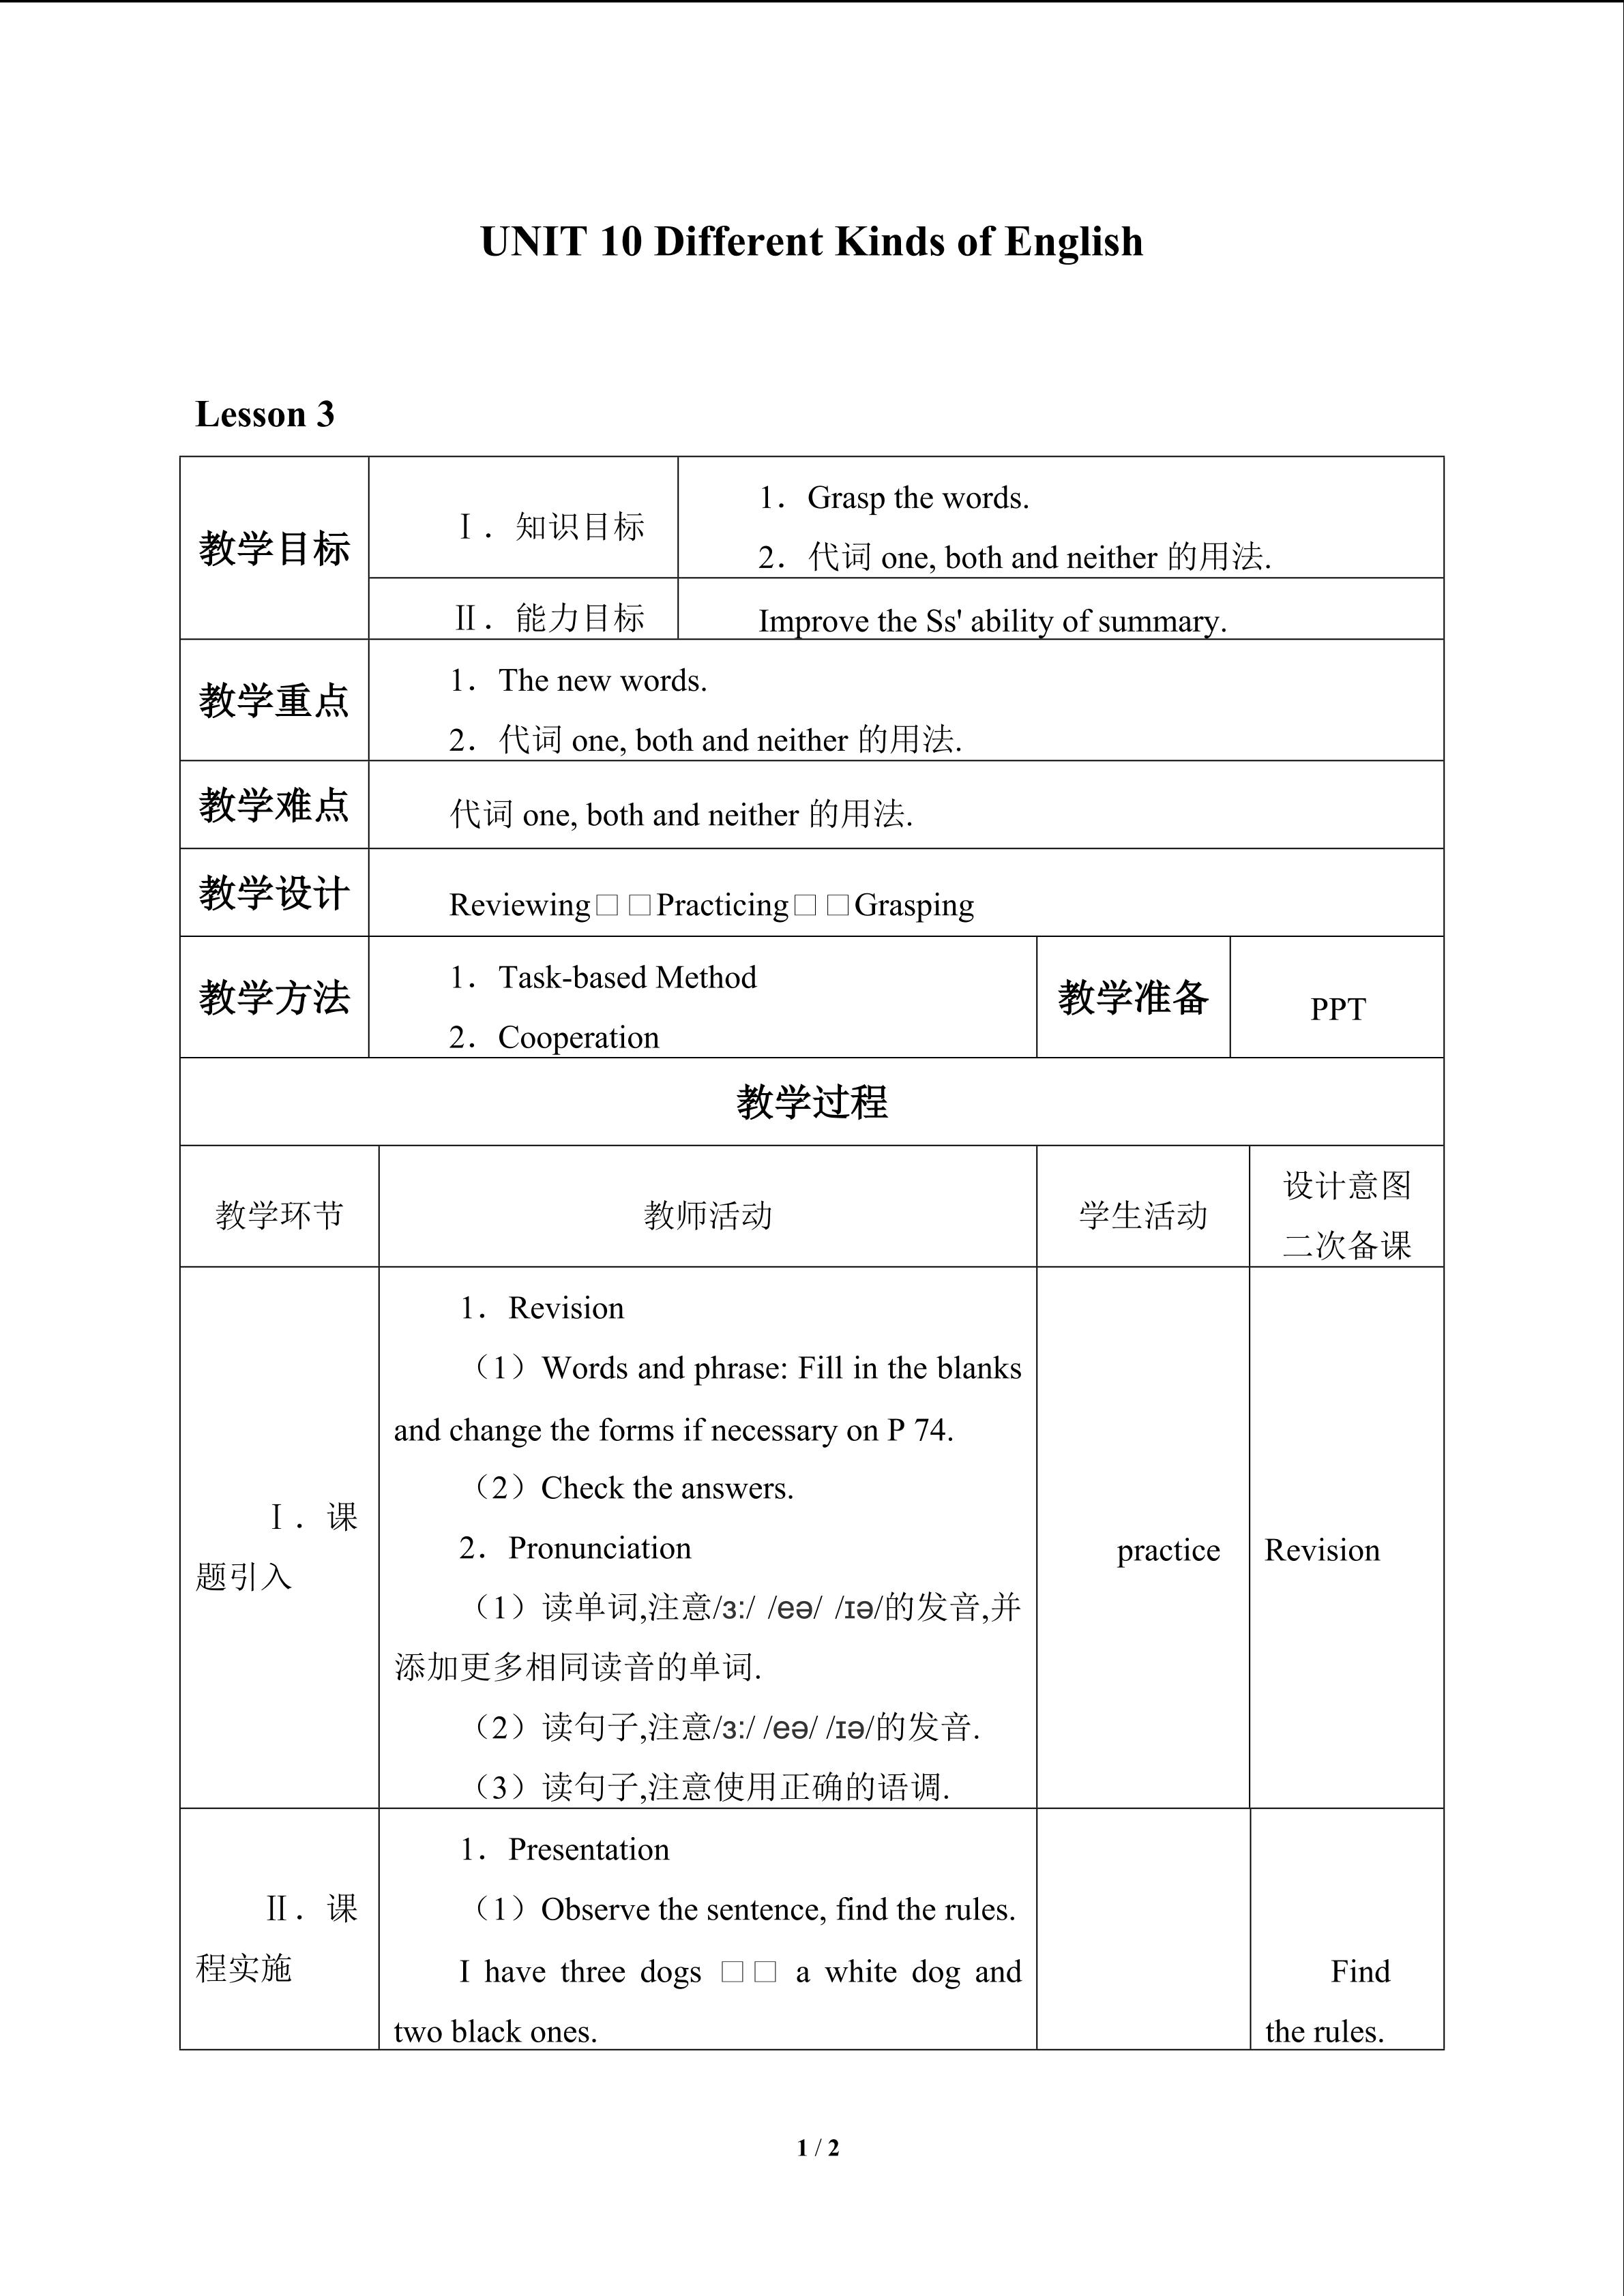 UNIT 10 Different Kinds of English_教案3